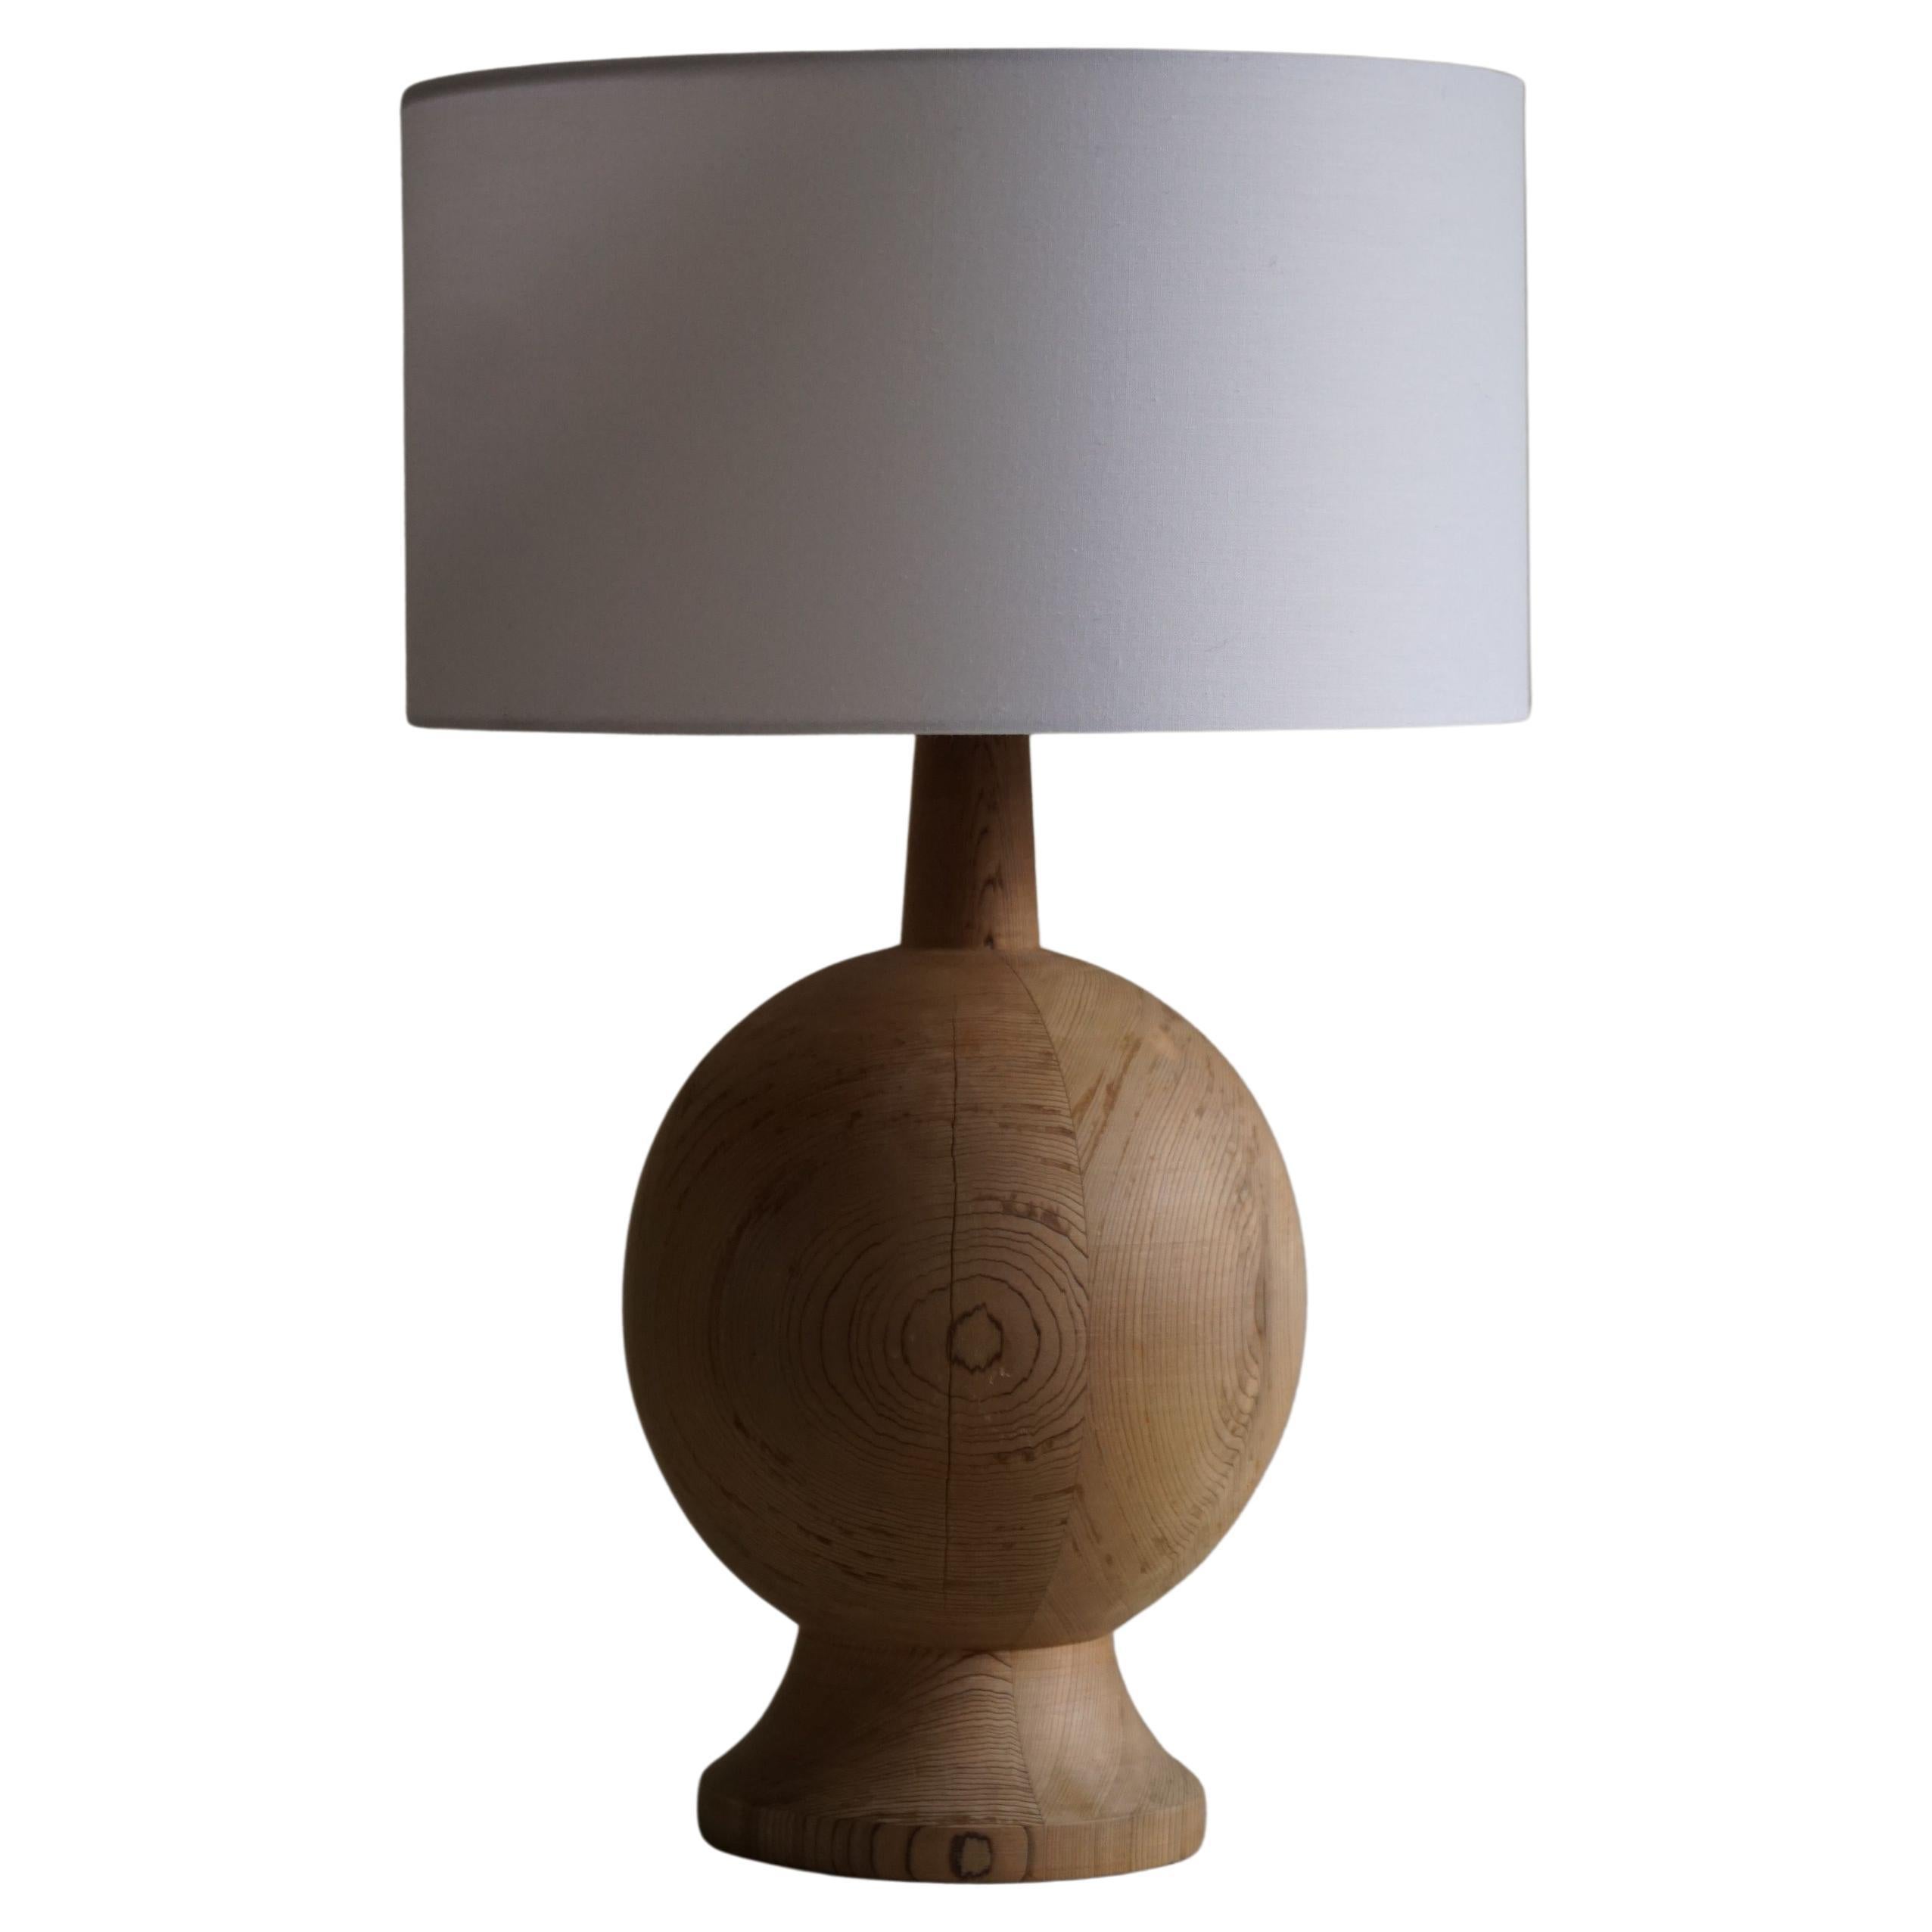 Danish Mid Century Modern, A Round Wooden Table Lamp in Solid Pine, 1960s